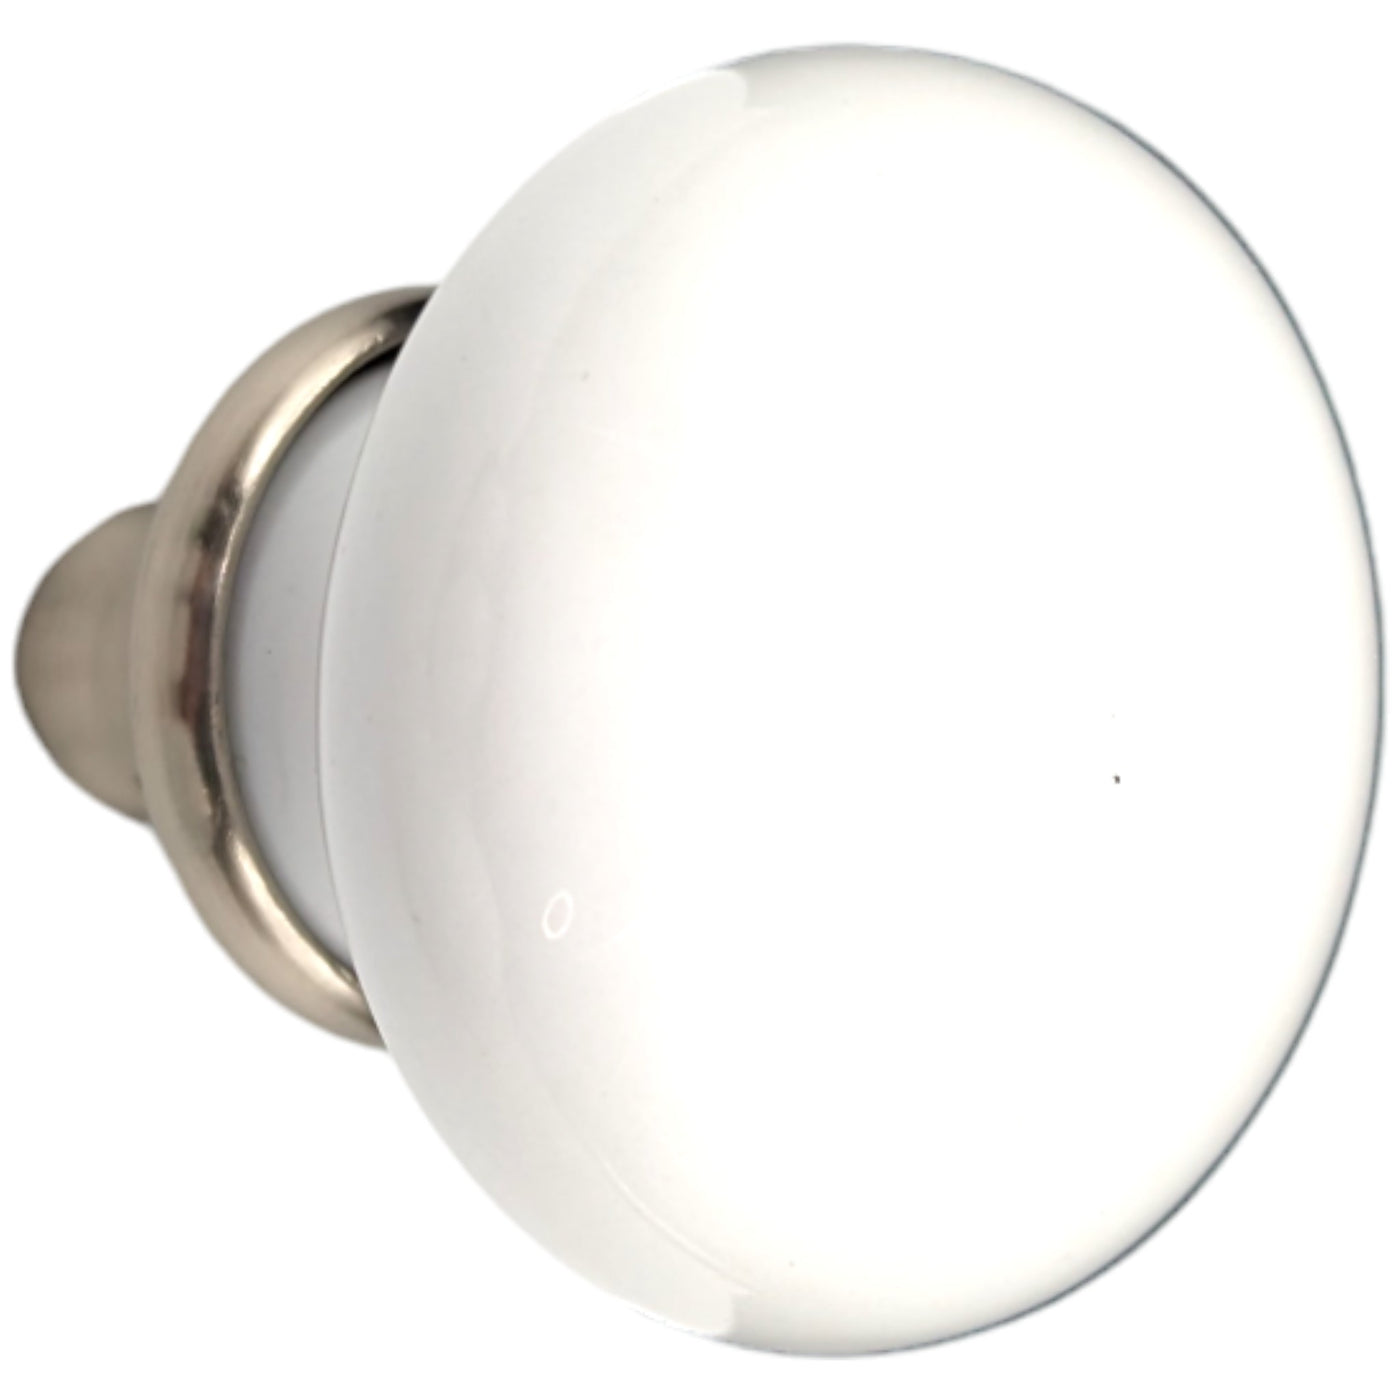 White Porcelain Spare Door Knob Set (Several Finishes Available)